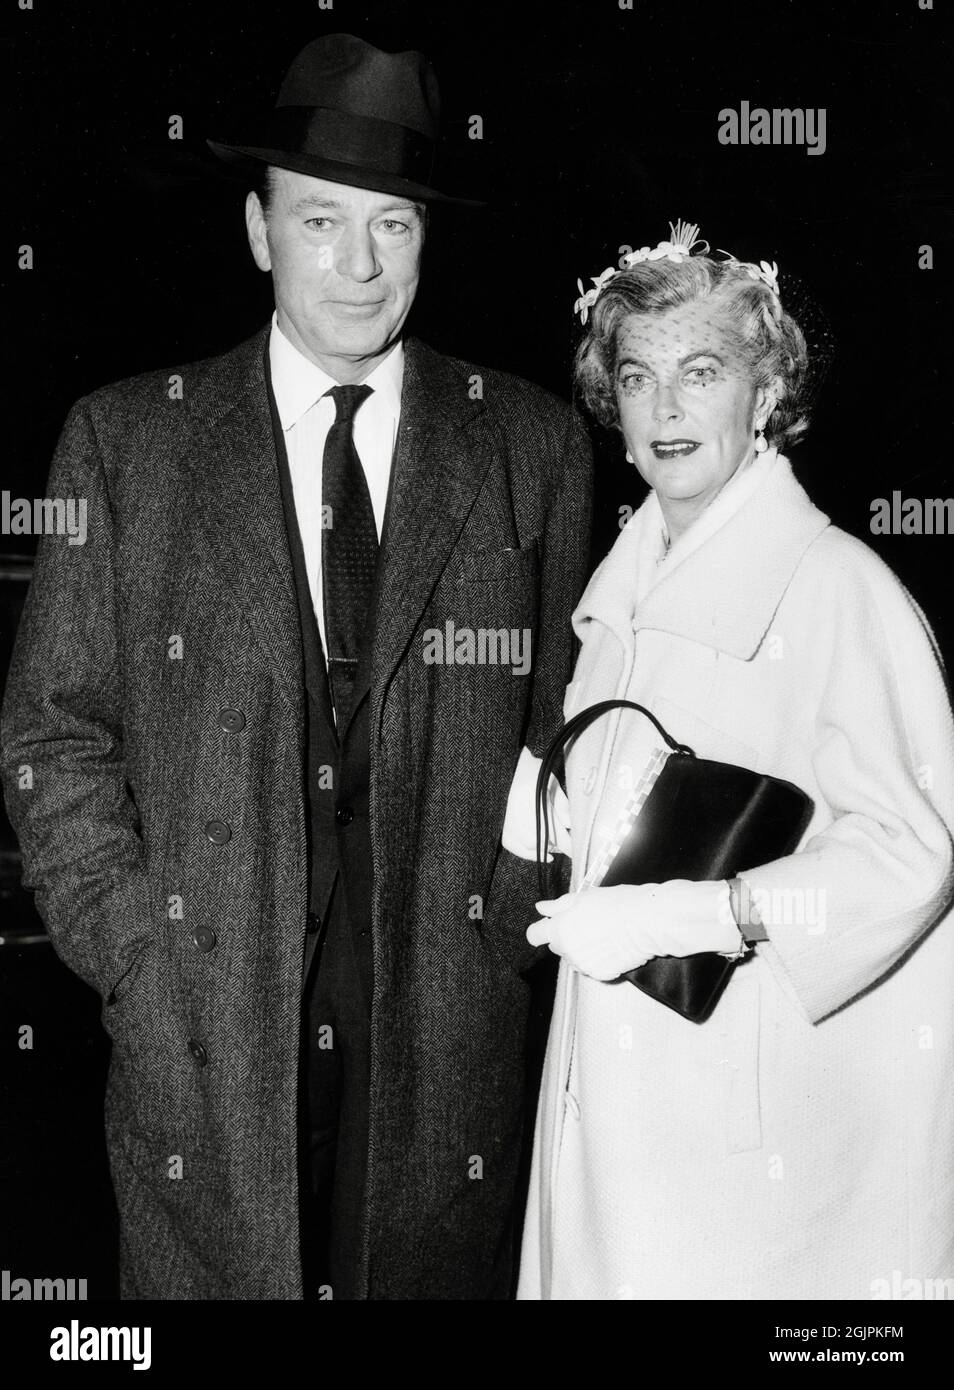 Gary Cooper and his wife, Veronica Balfe, attend the film premiere of 'The Hanging Tree' at the Roxy Theatre in New York City, circa 1959 / File Reference # 34145-462THA Stock Photo